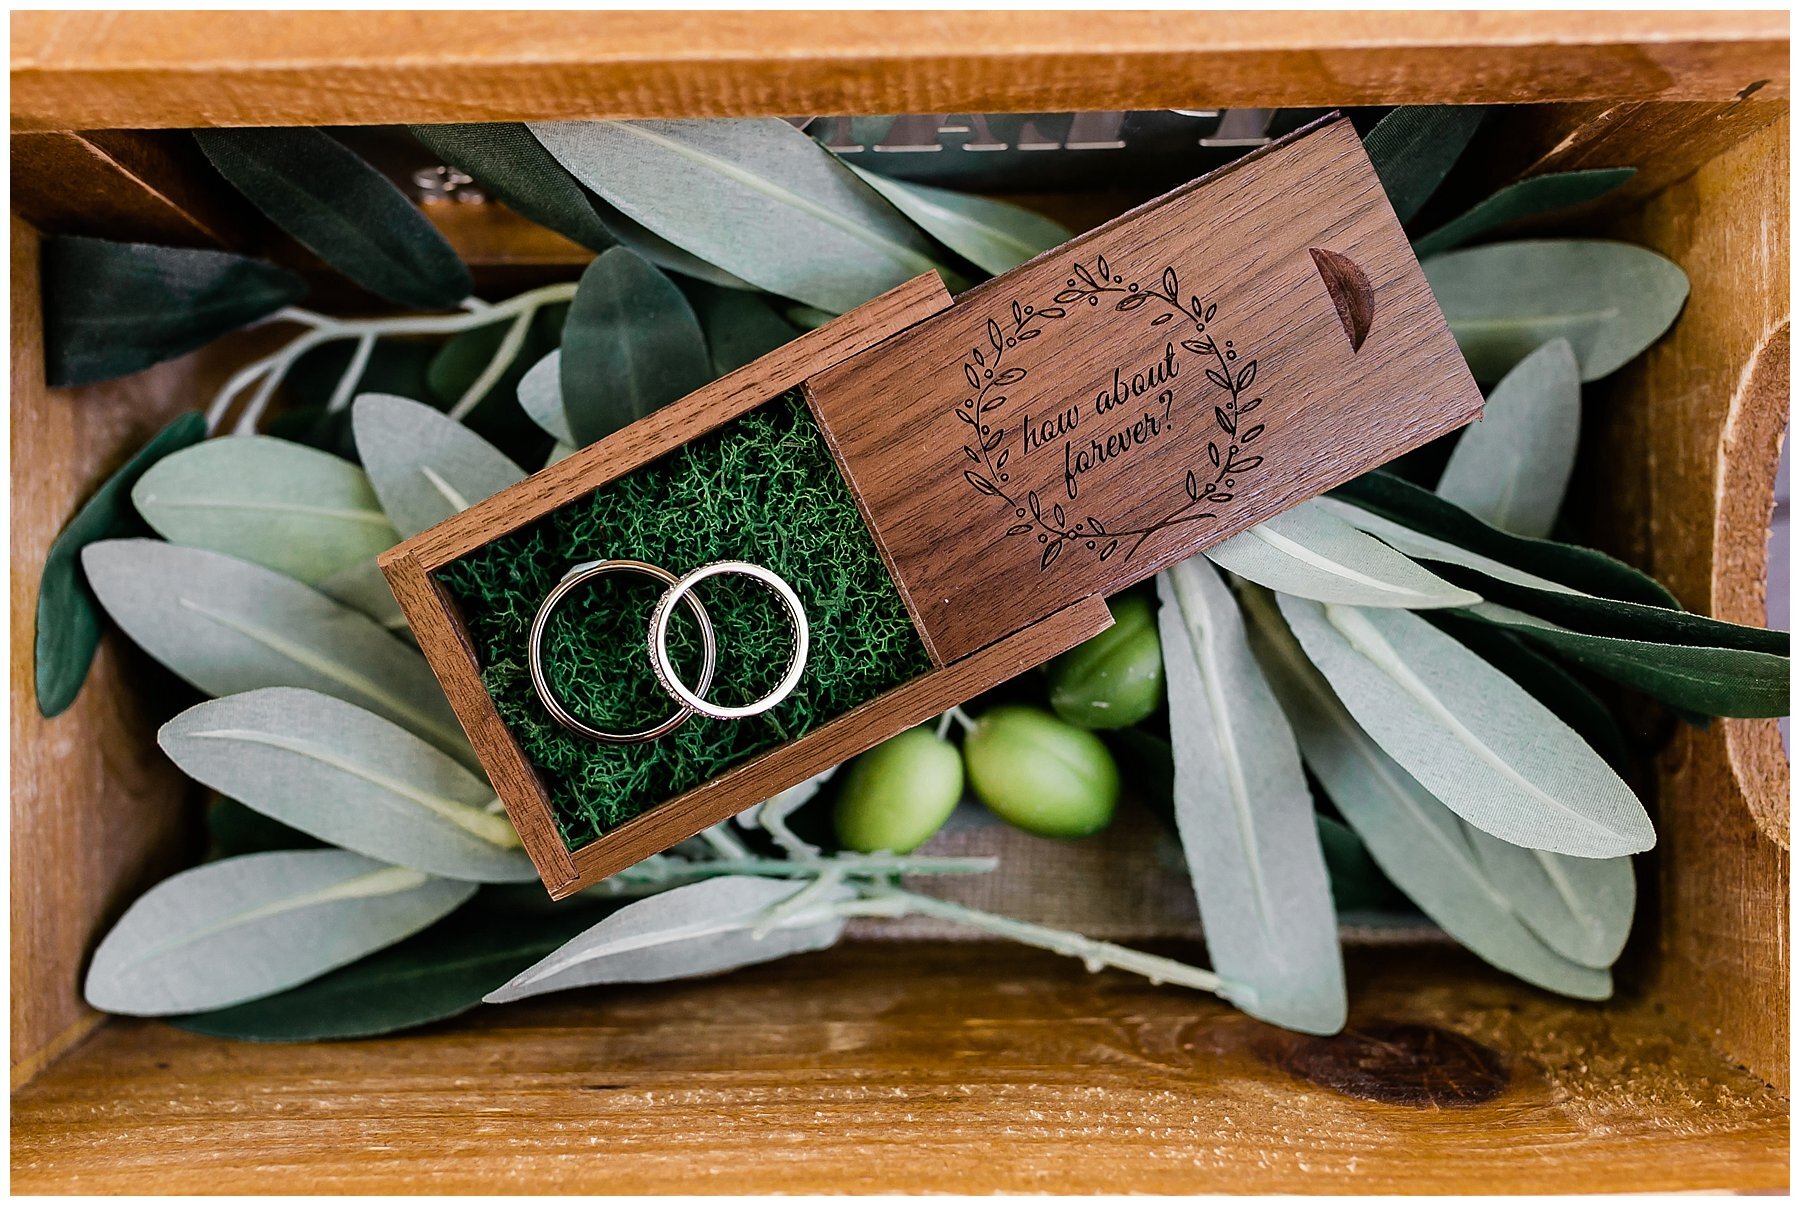  wedding rings in the box on top of leaves 